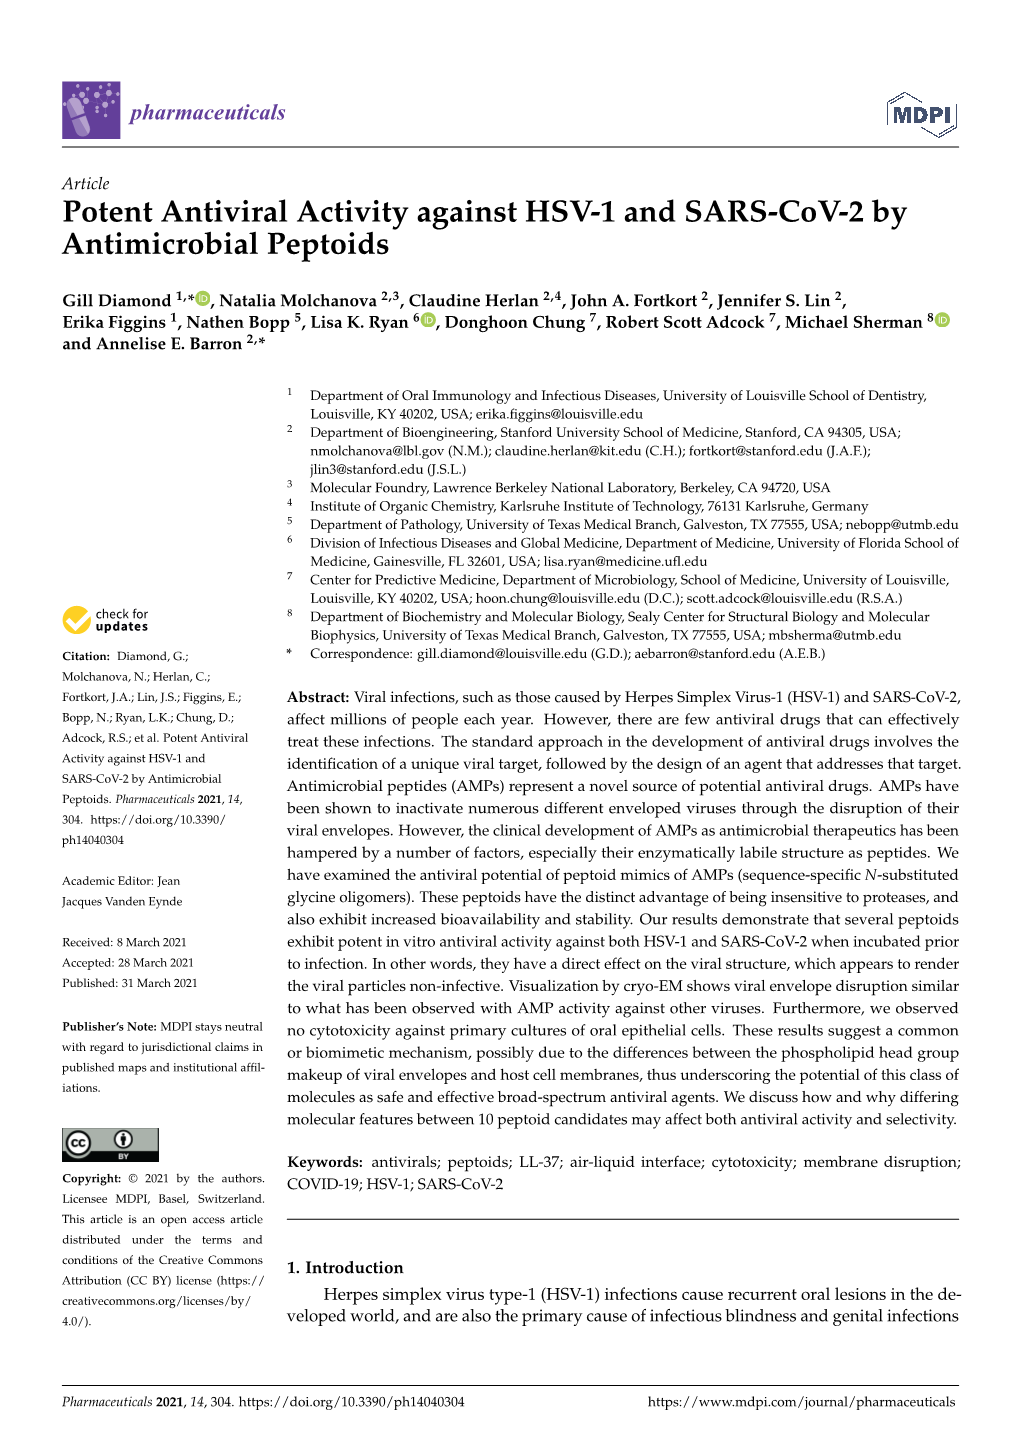 Potent Antiviral Activity Against HSV-1 and SARS-Cov-2 by Antimicrobial Peptoids